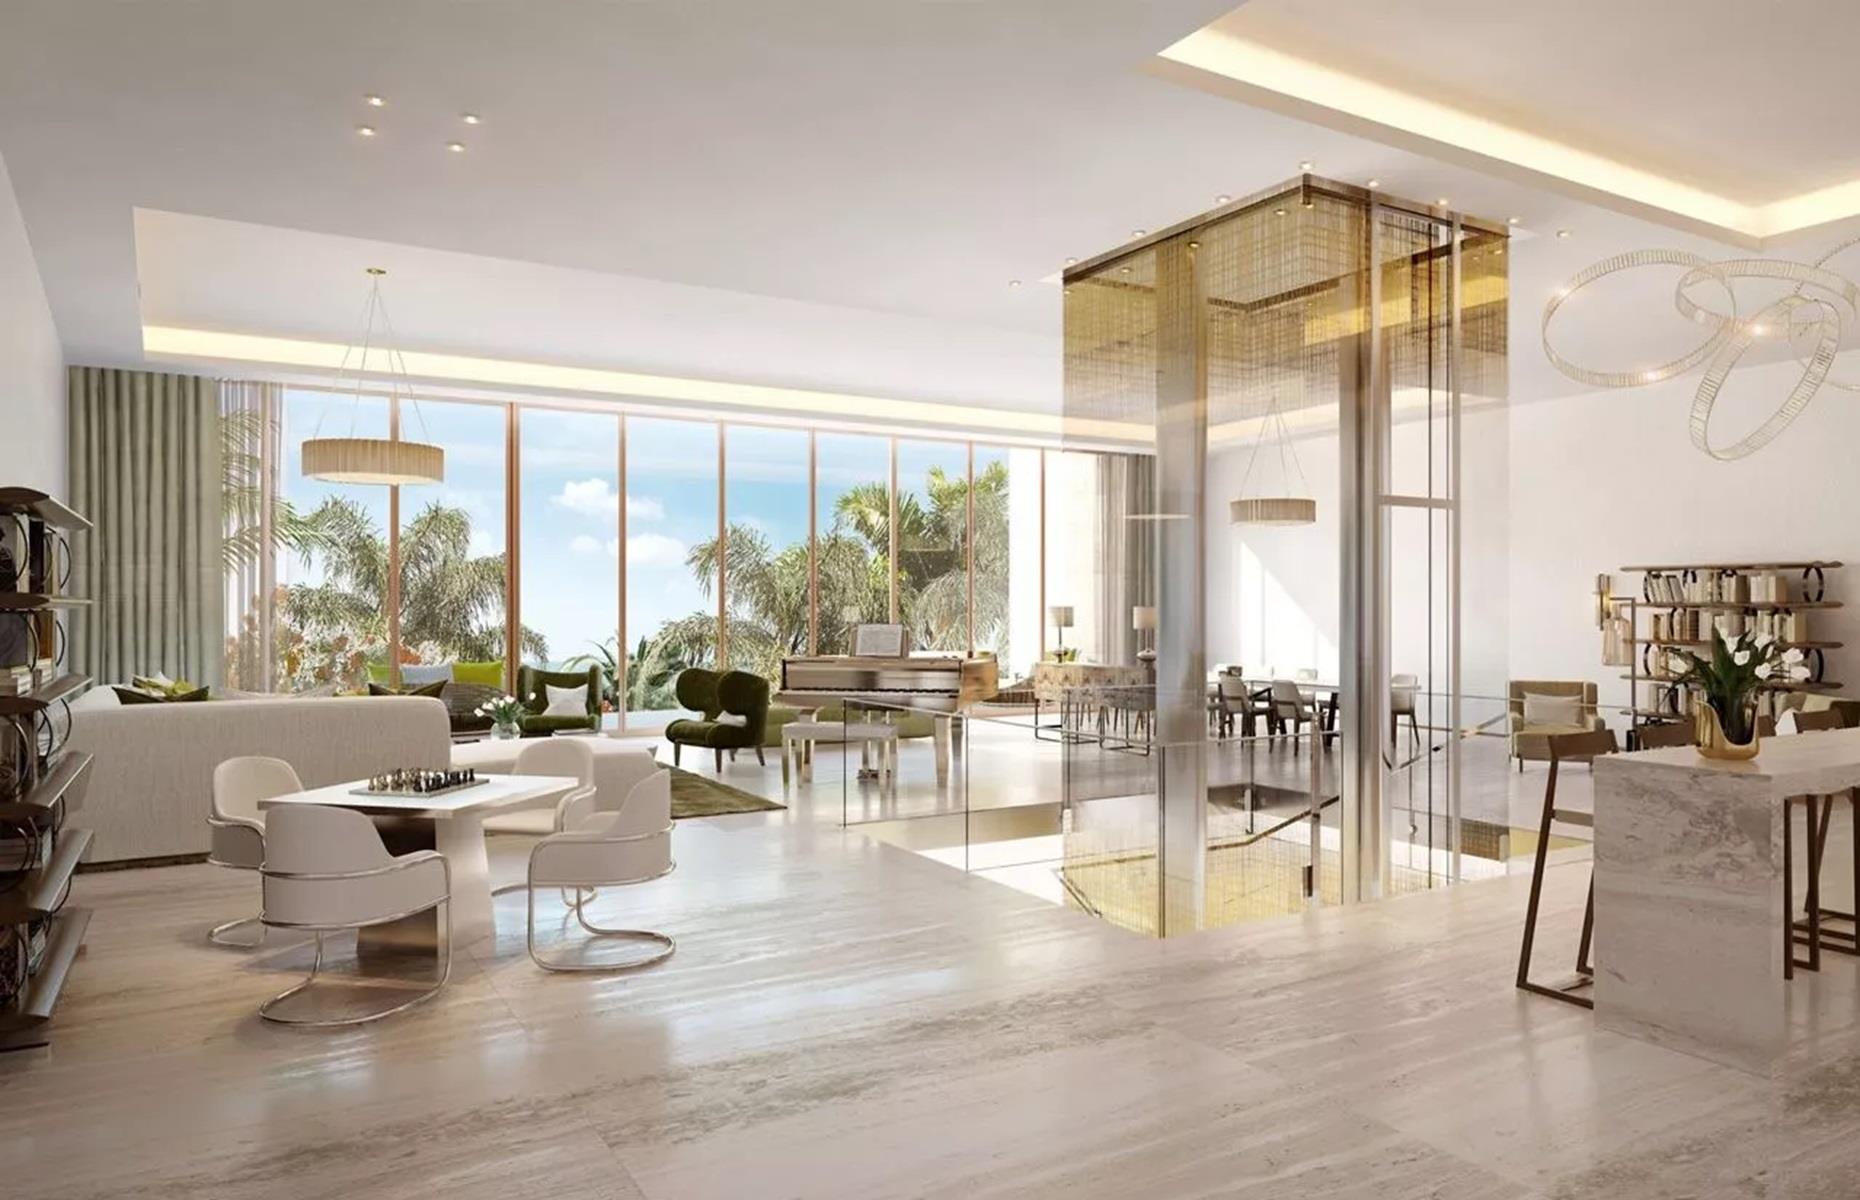 <p>Situated on the crescent of The Palm and next to the iconic Atlantis The Palm resort, the five-bedroom <a href="https://b1properties.ae/2022/08/30/b1-properties-sells-the-most-prestigious-penthouse-at-the-atlantis-the-royal-residences-%ef%bf%bcfor-aed-164-million%ef%bf%bc%ef%bf%bc/">triplex penthouse</a> is spread across about 25,000 square feet and features a sky garden, two private pools and terraces, a private lift and 360-degree views of both the Arabian sea and the Palm Jumeirah.  </p>